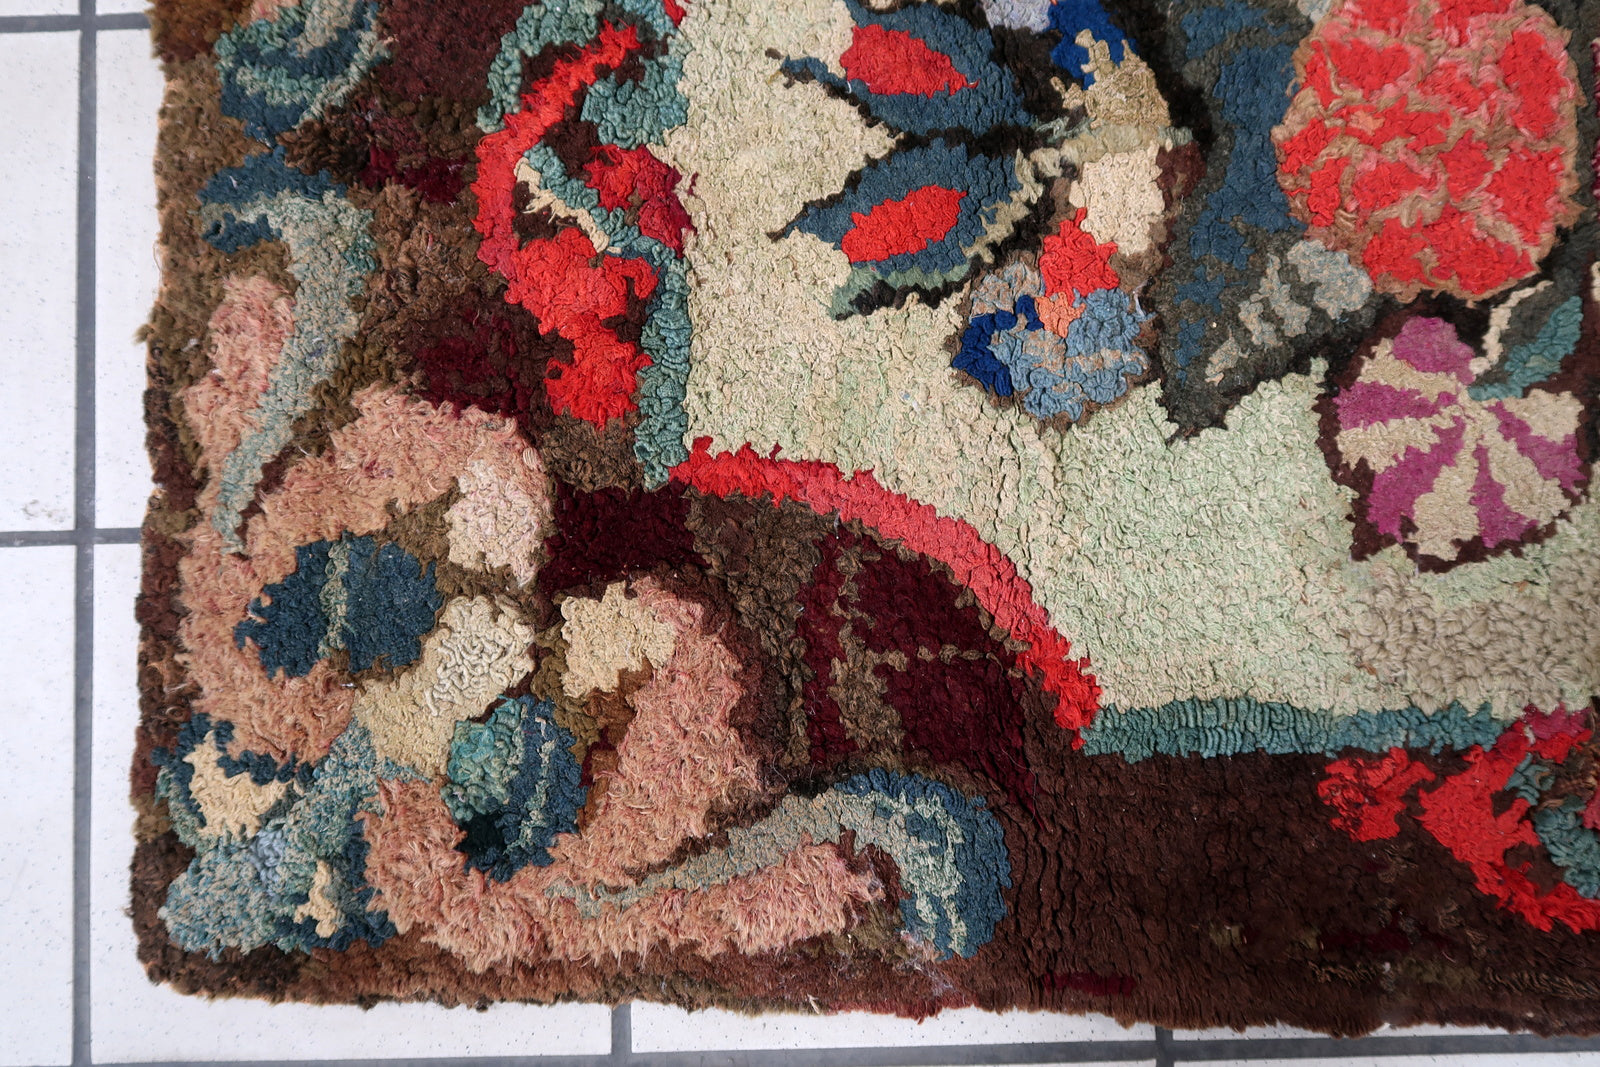 Handmade antique American Hooked rug in floral design. The rug is from the end of 19th century. It is in good condition, has some old restorations.